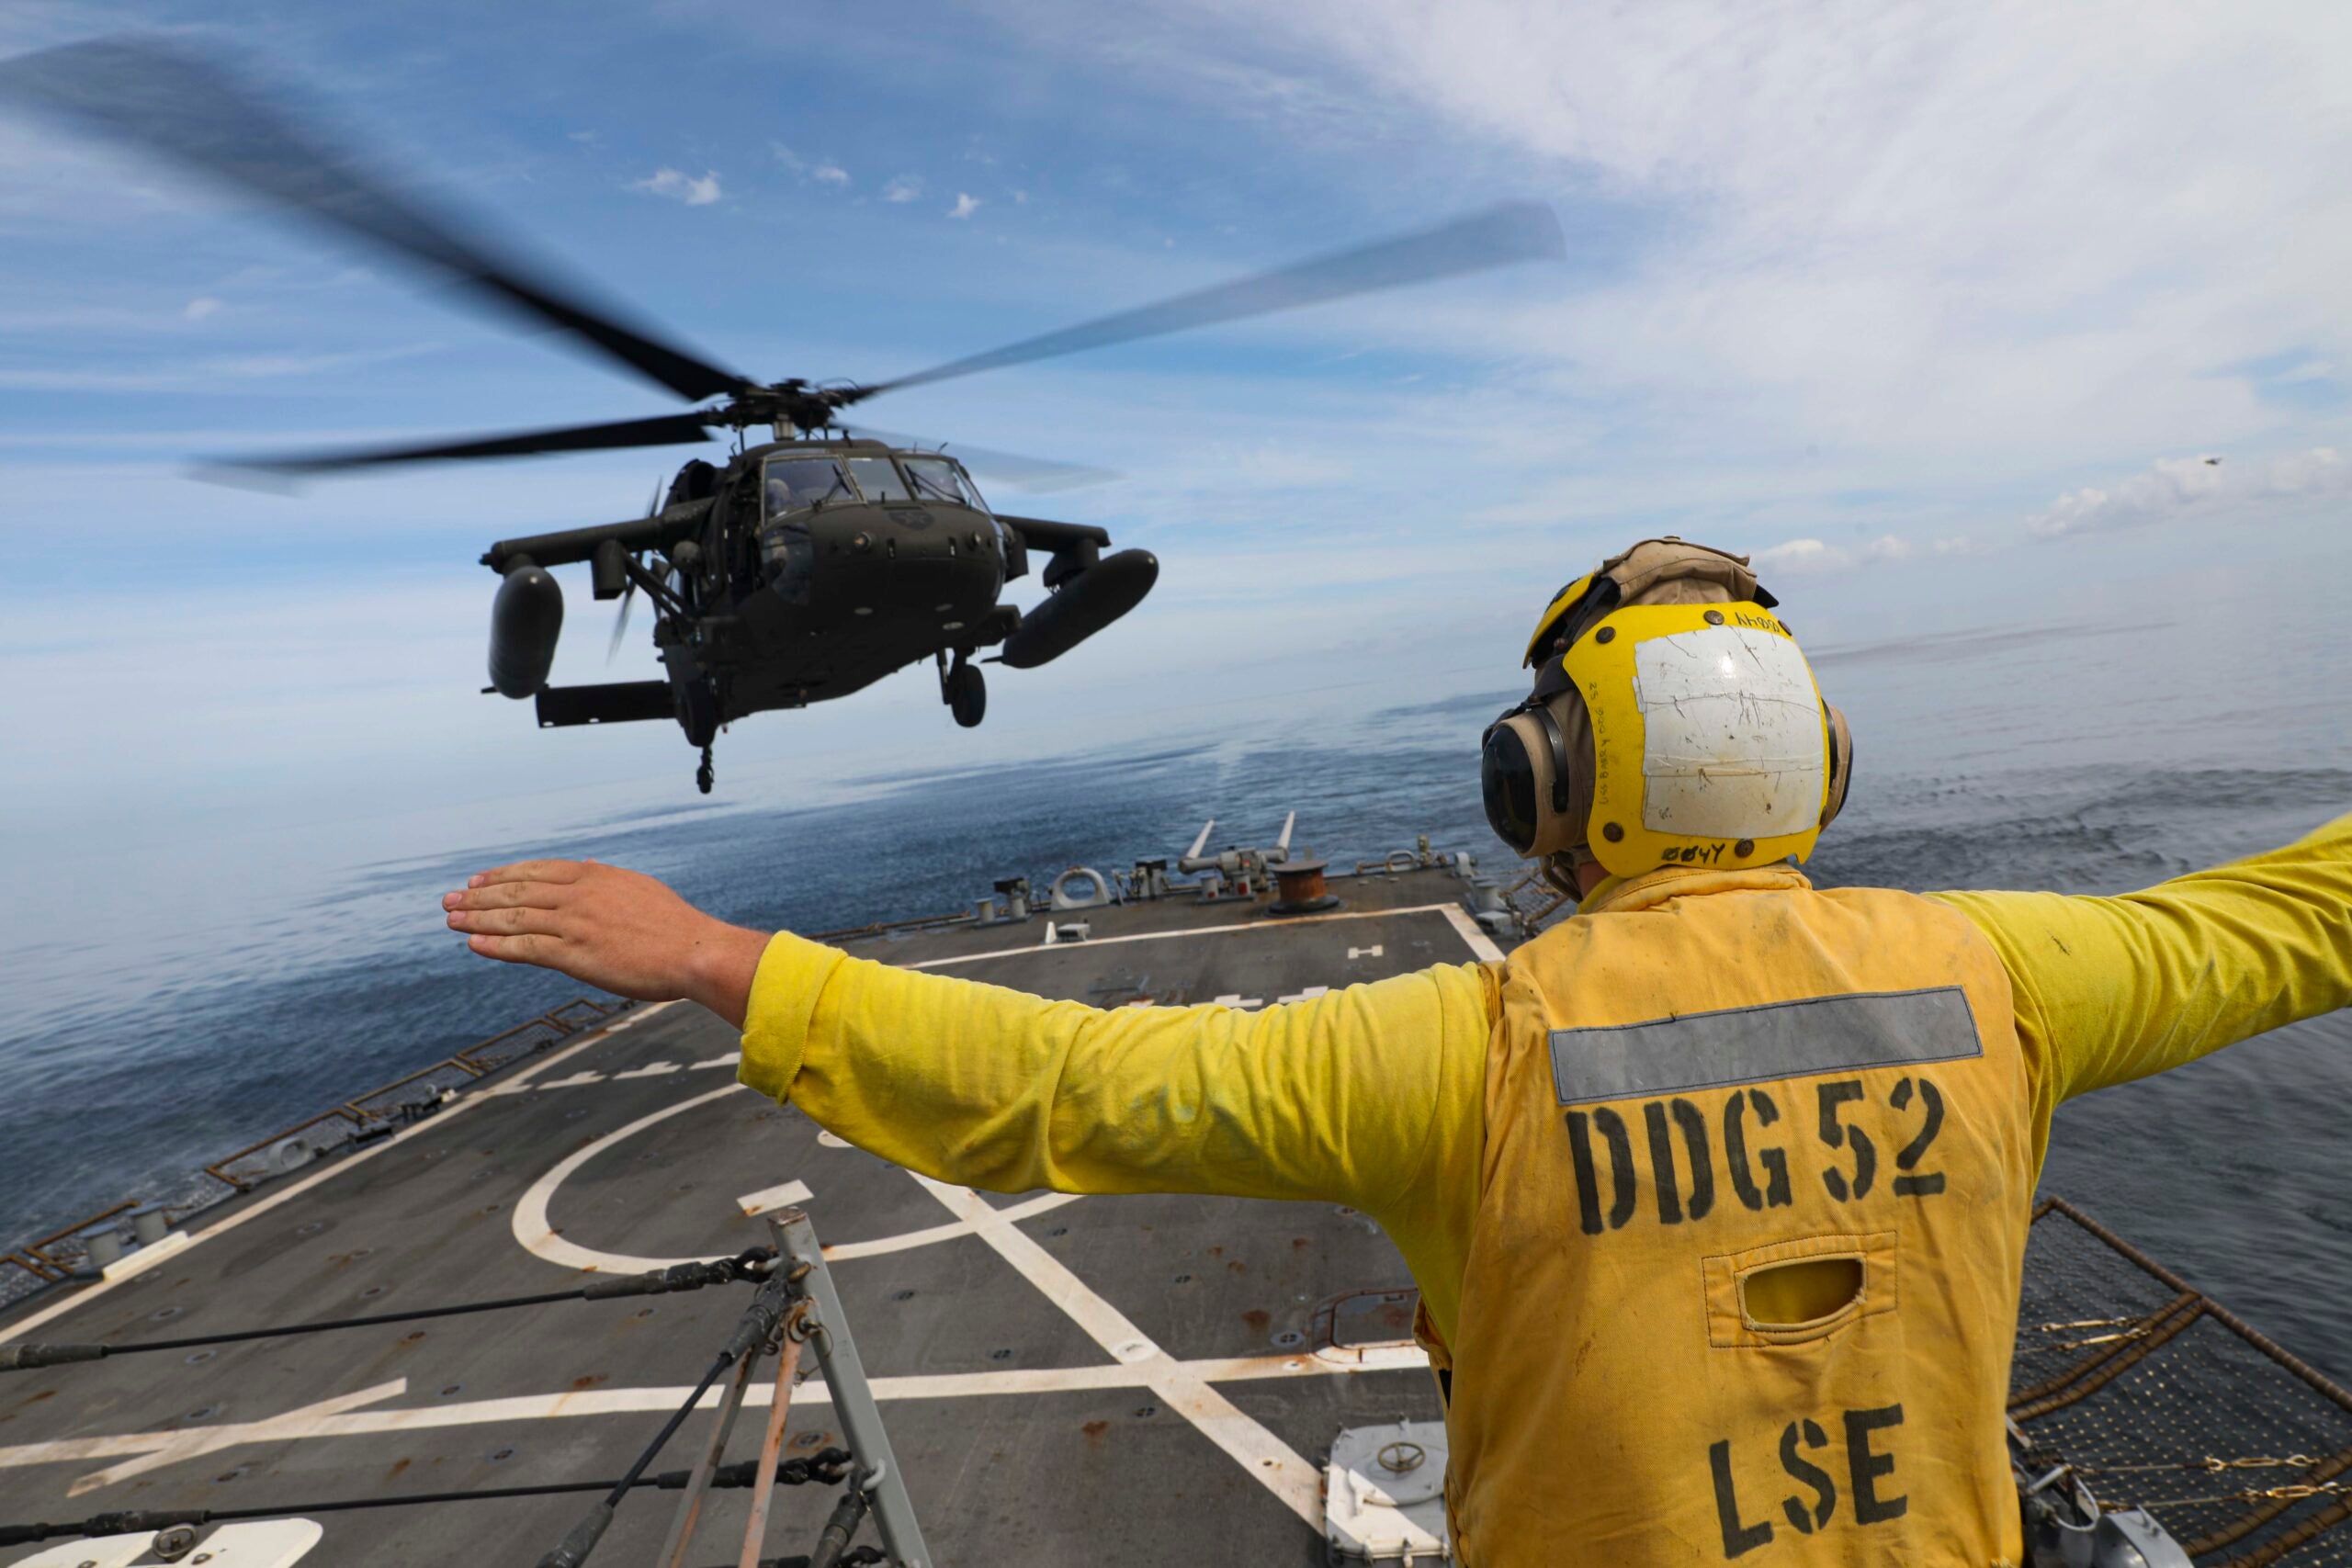 WATERS OFF THE COAST OF THE KOREAN PENINSULA (Sept. 26, 2022) – Seaman Evan Sand, from Annandale, Minnesota, signals a UH-60M Black Hawk helicopter assigned to the Army’s 2nd Combat Aviation Brigade as it lands on the flight deck aboard Arleigh Burke-class guided-missile destroyer USS Barry (DDG 52). Barry, as part of the Ronald Reagan Carrier Strike Group (CSG), is participating with the Republic of Korea (ROK) Navy in Maritime Counter Special Operations Exercise (MCSOFEX) to strengthen interoperability and training. The U.S. routinely conducts CSG operations in the waters around the Republic of Korea to exercise maritime maneuvers, strengthen the U.S.-ROK alliance and improve regional security. (U.S. Navy photo by Mass Communication Specialist 1st Class Greg Johnson)